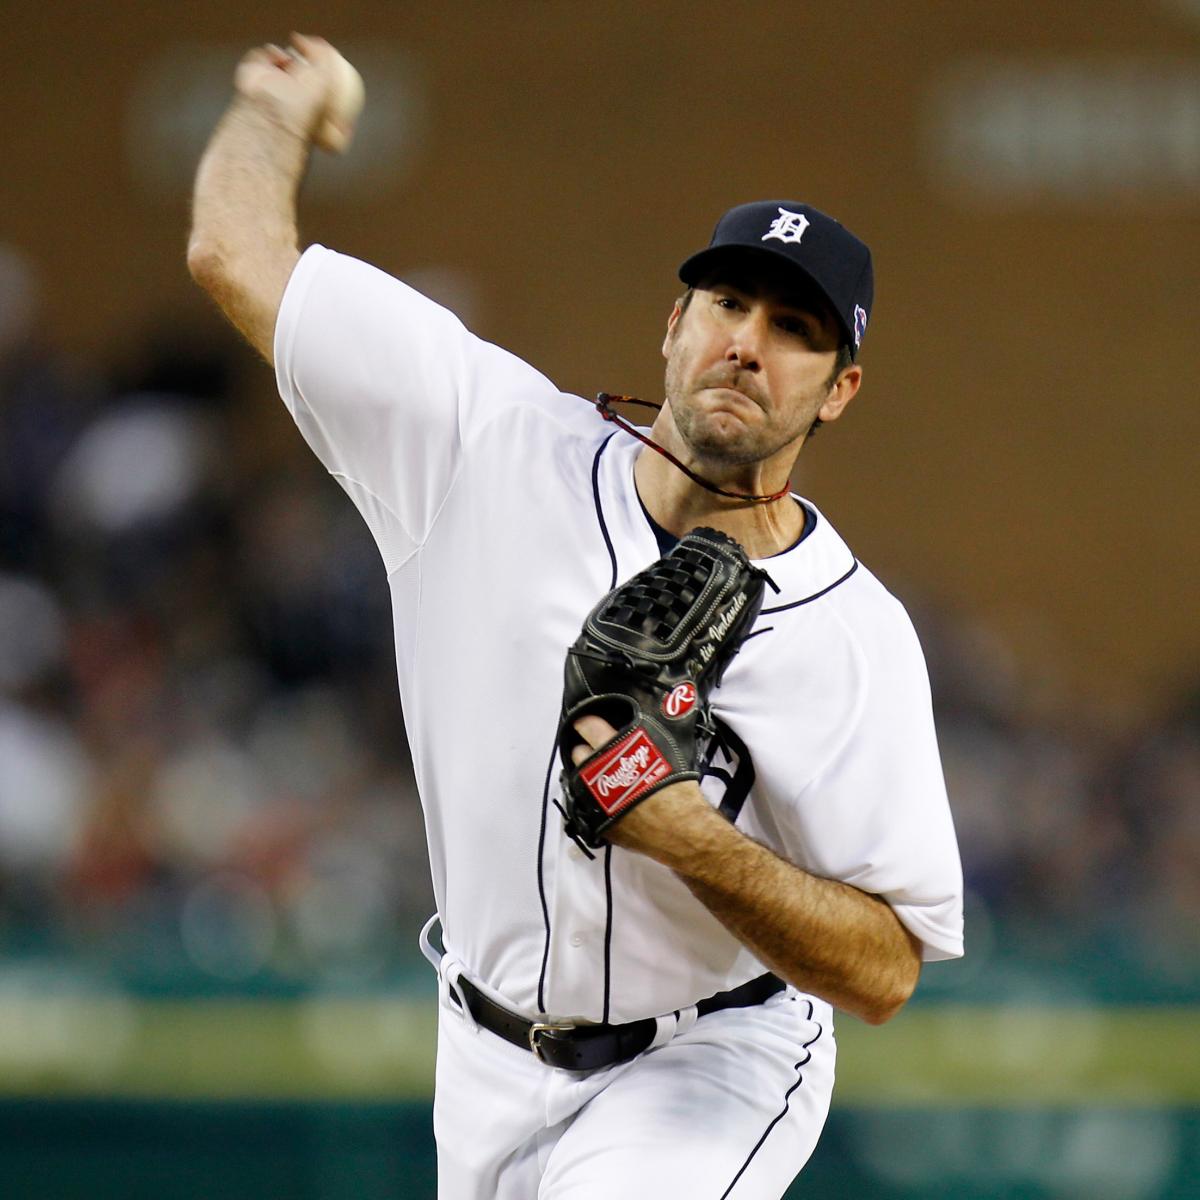 ALDS Game 5: Tigers advance to ALCS behind Justin Verlander's ace  performance - Bless You Boys